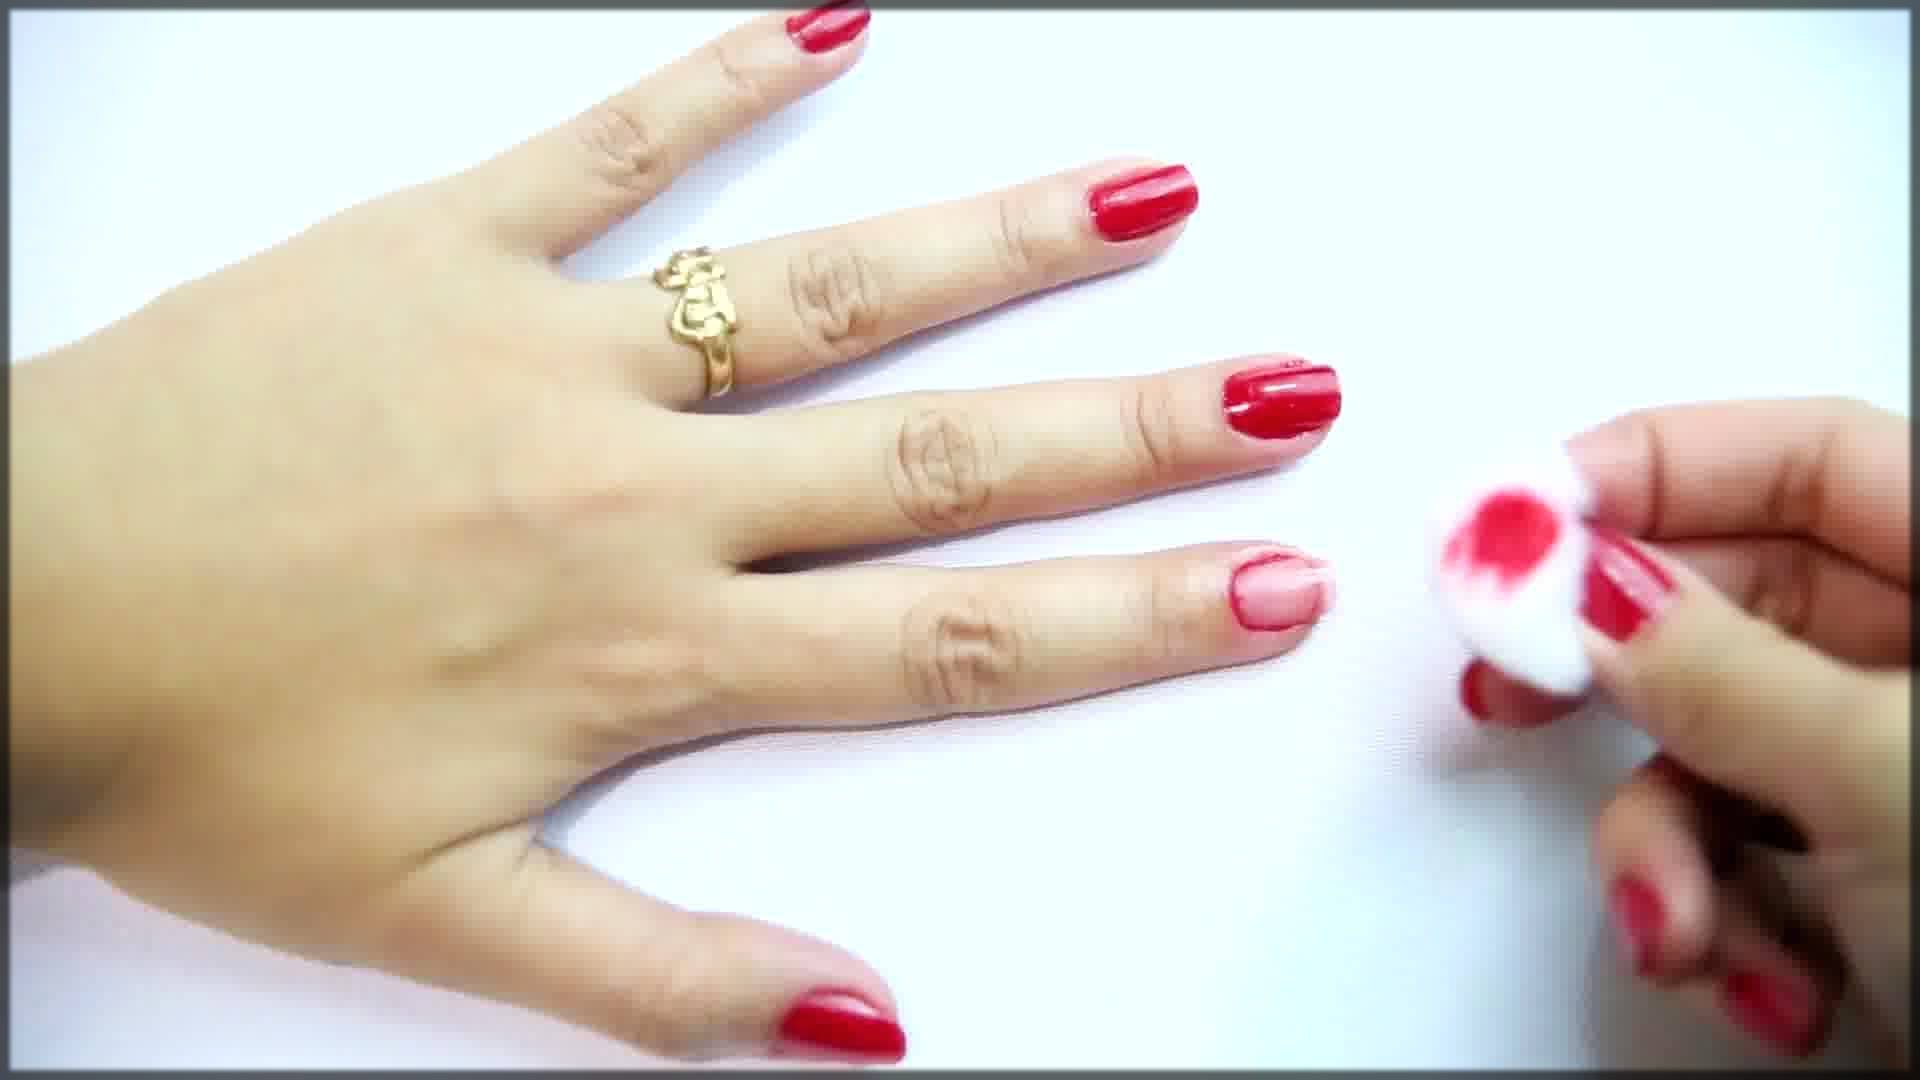 remove old nail polish for perfect whitening manicure